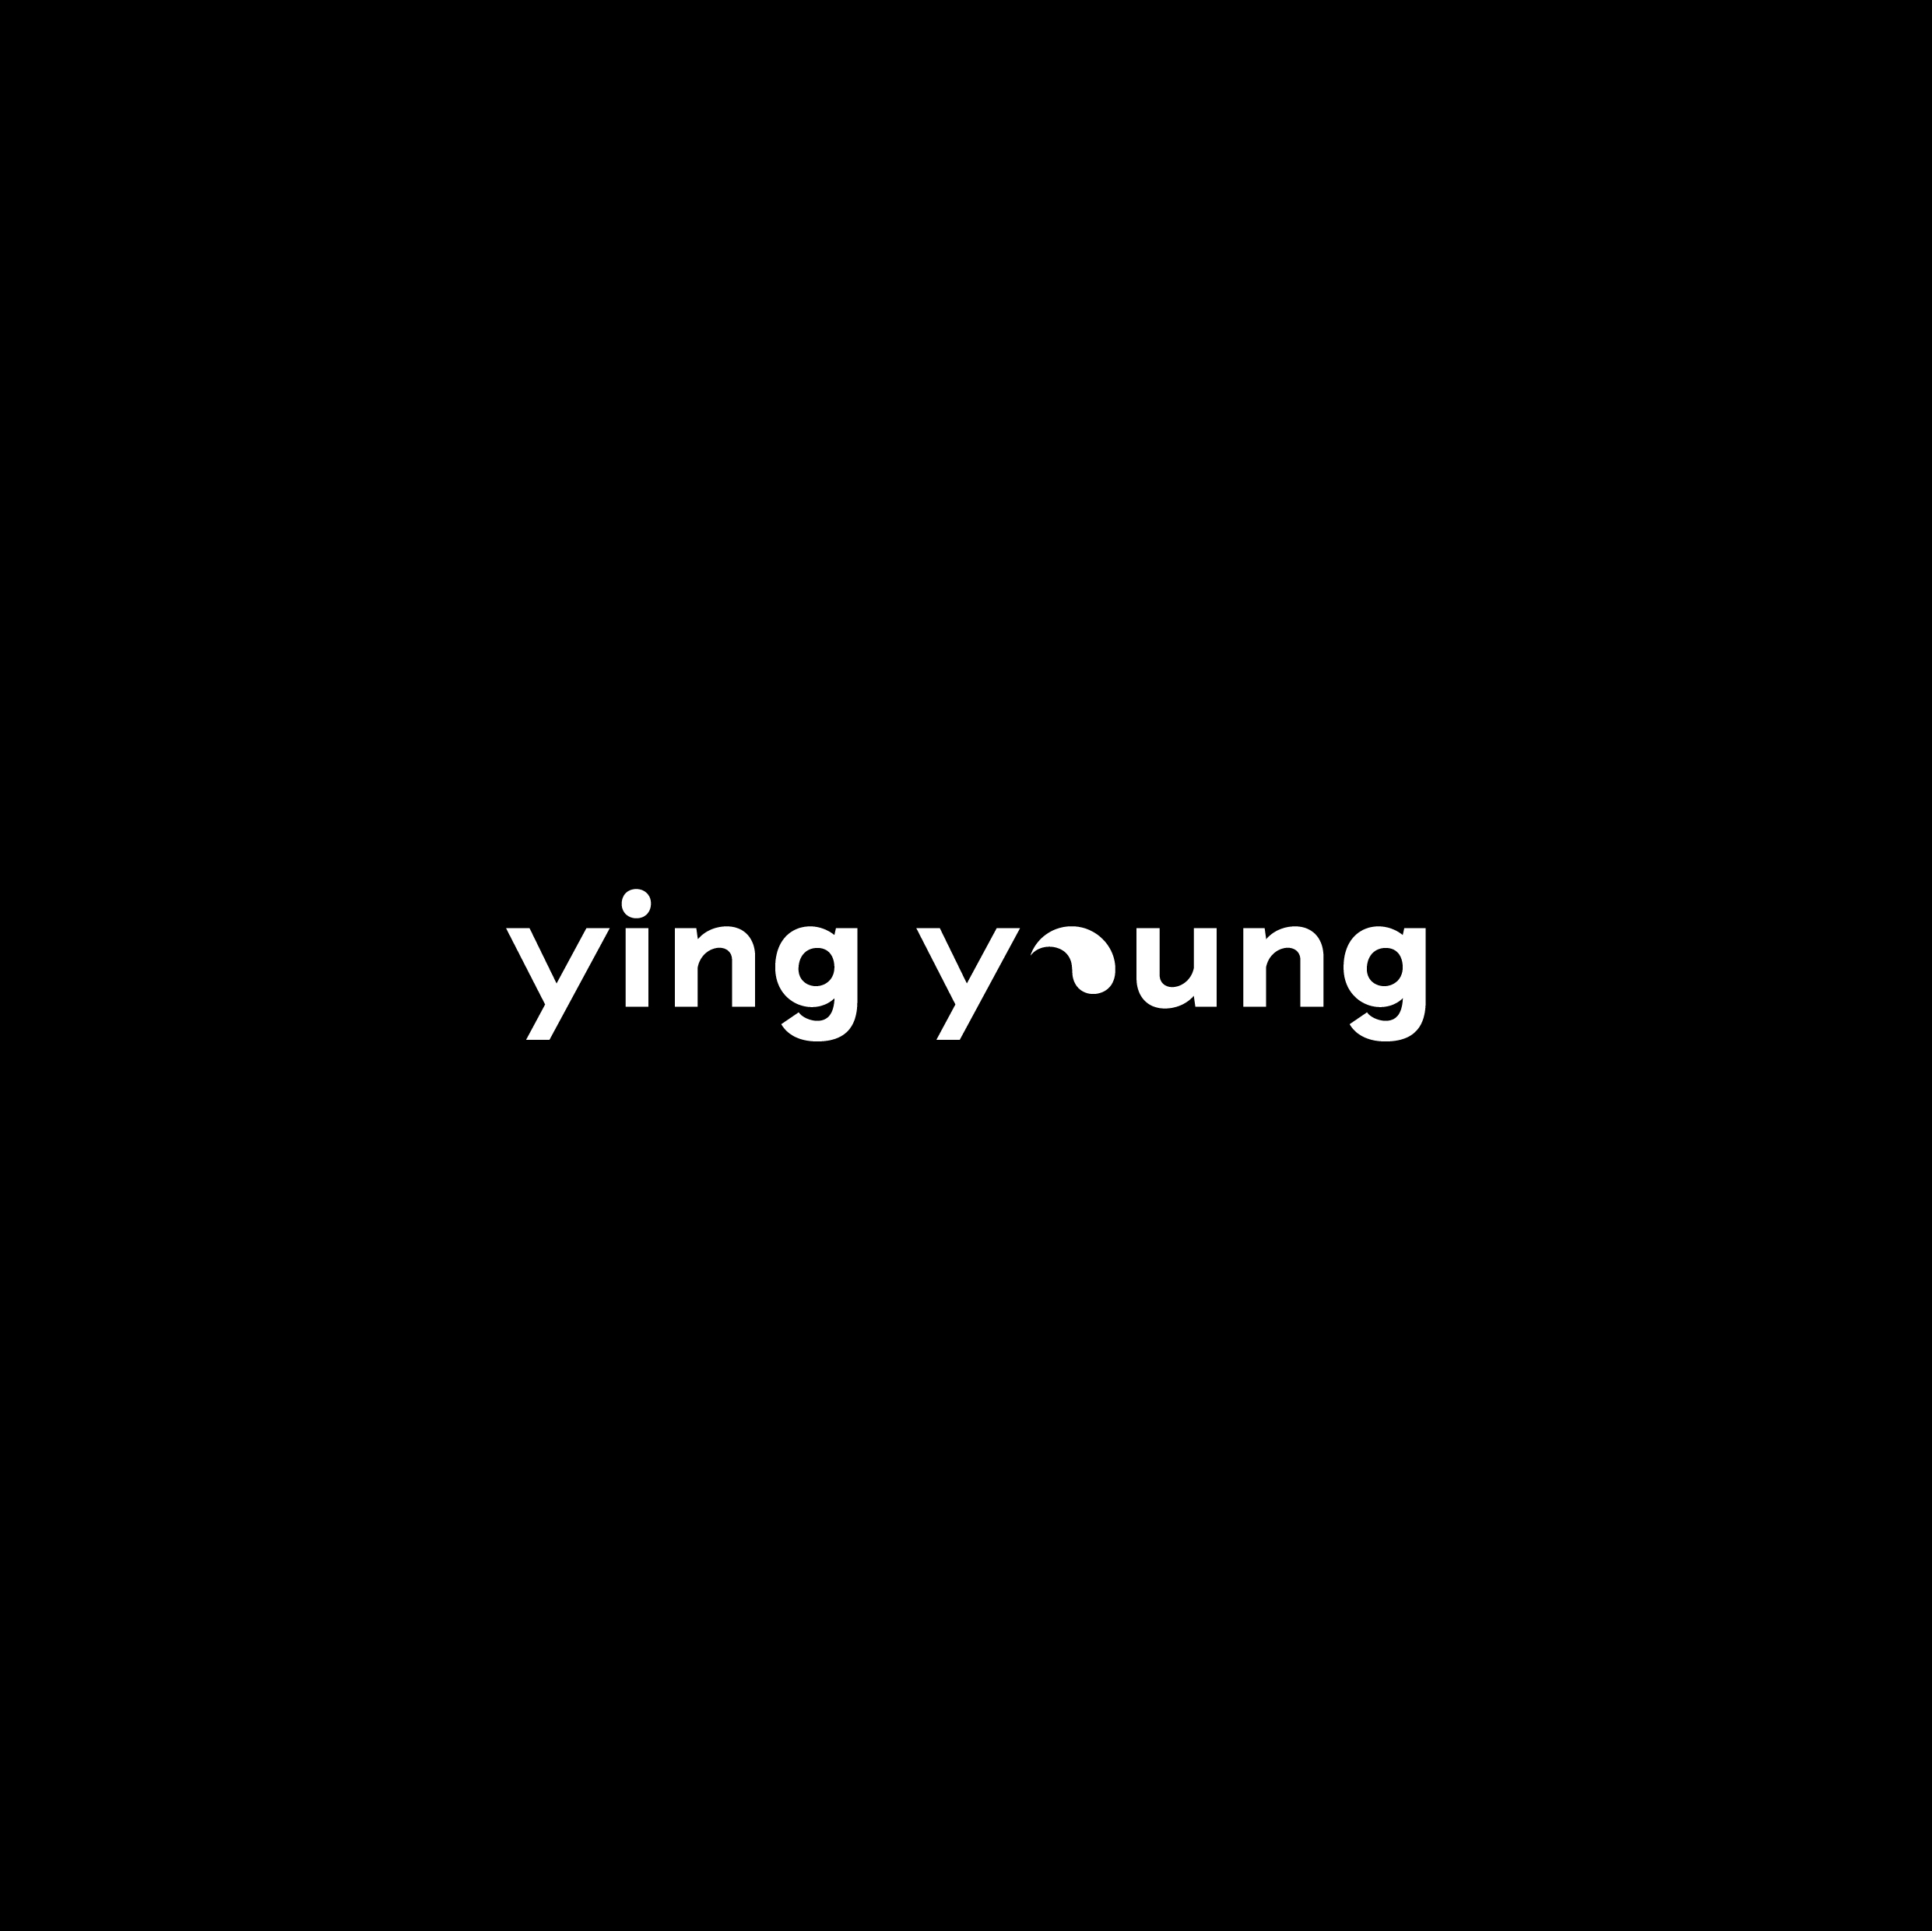 Ying_young-01